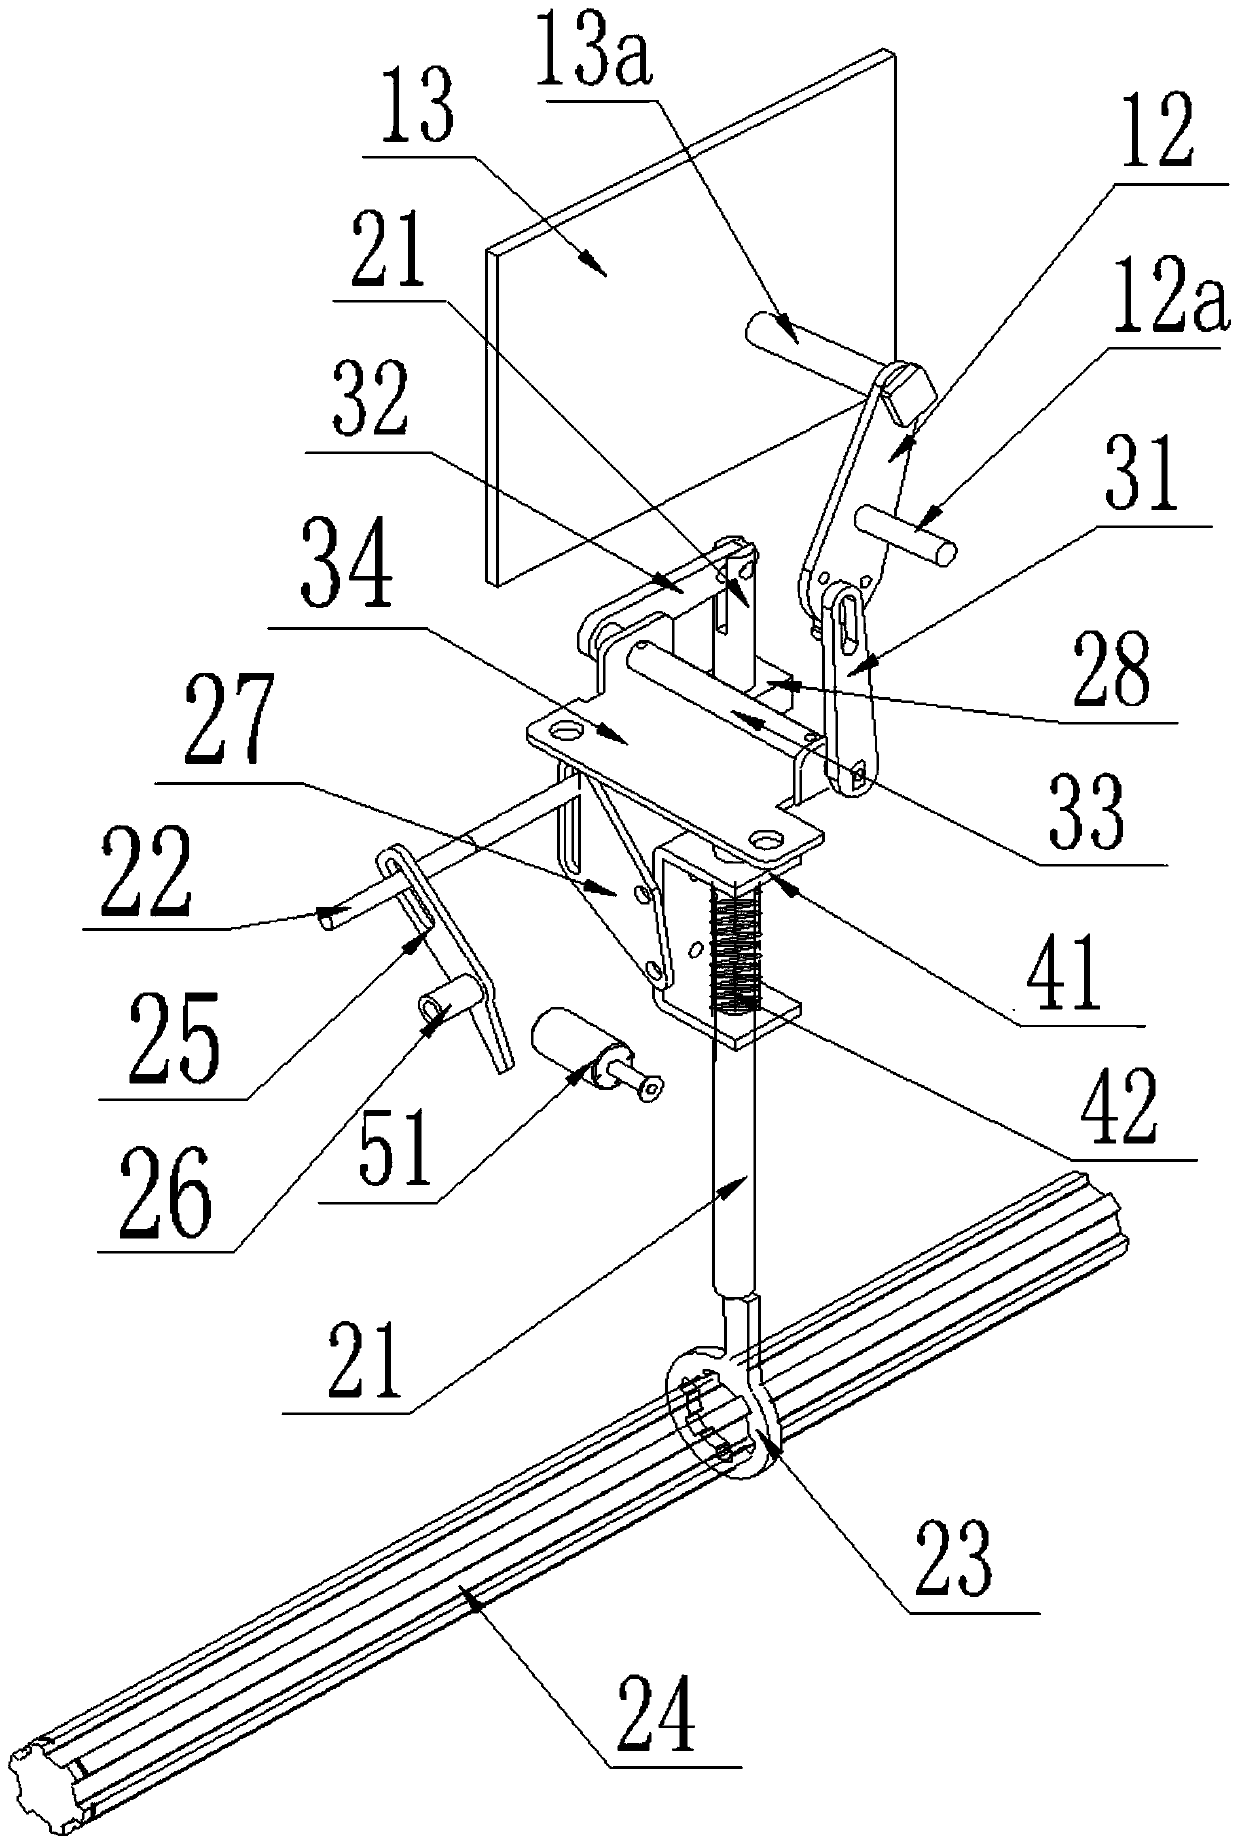 Mechanical interlocking device of isolation switch and breaker